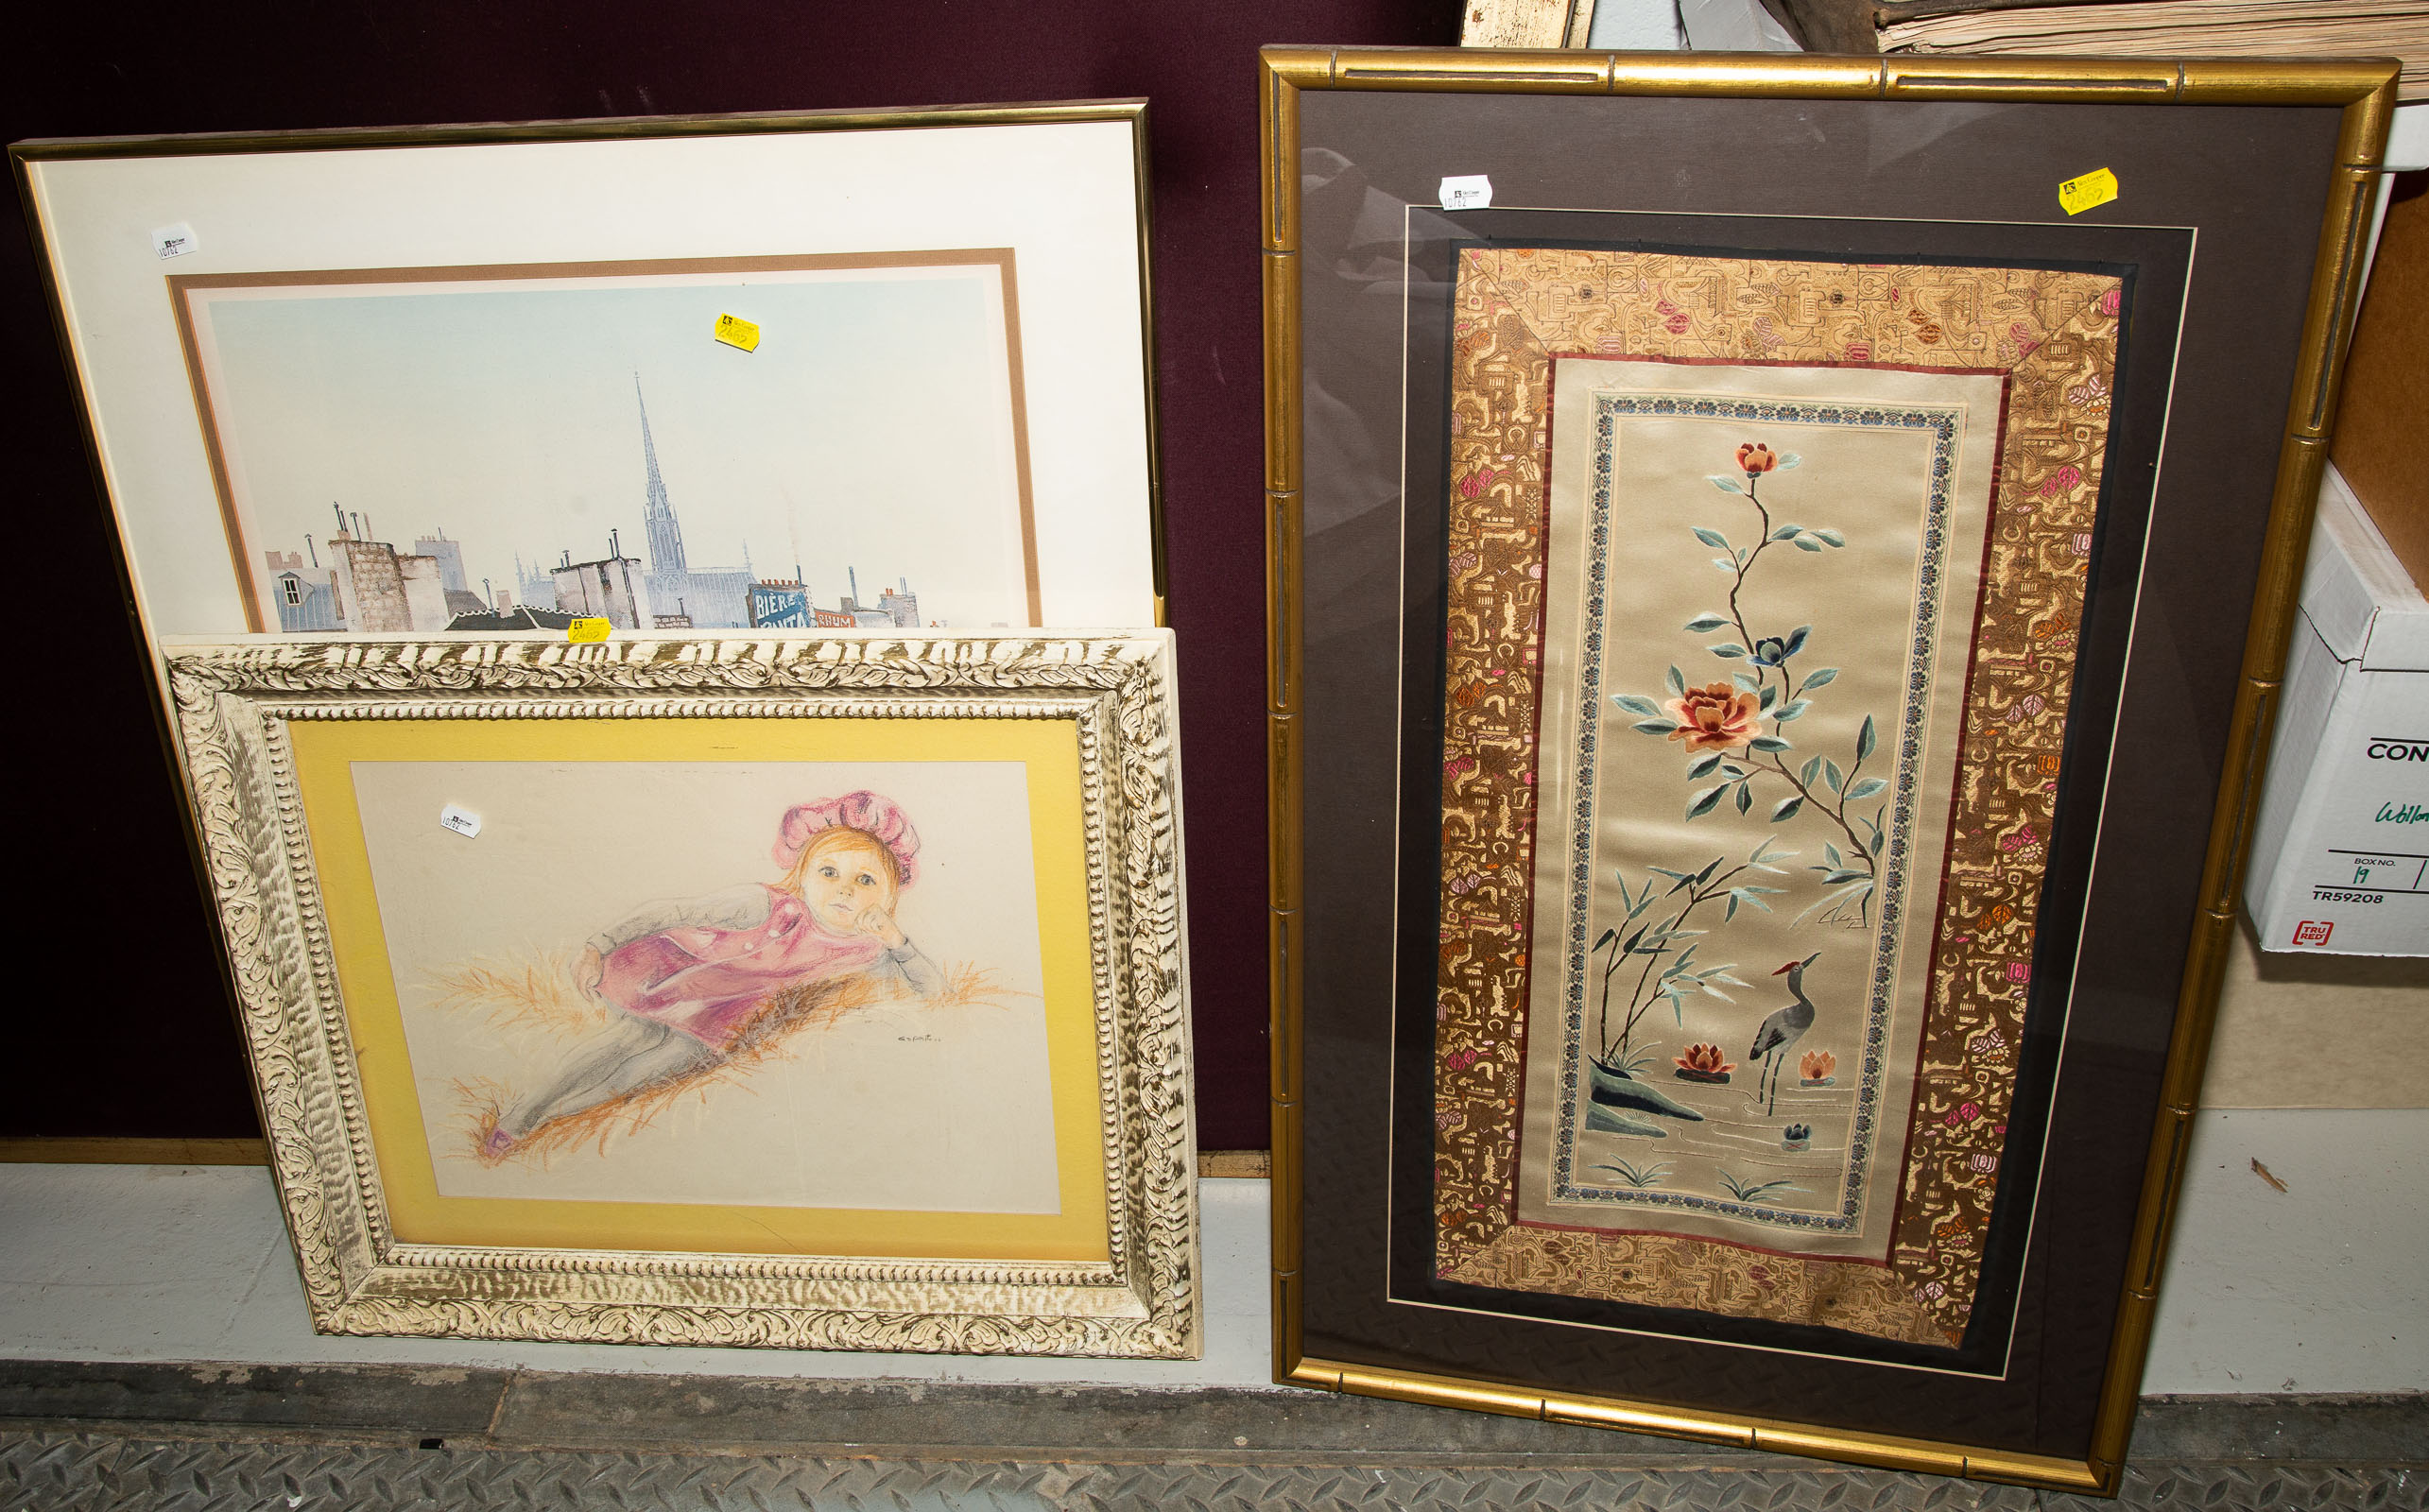 TWO FRAMED ARTWORKS WITH LARGE